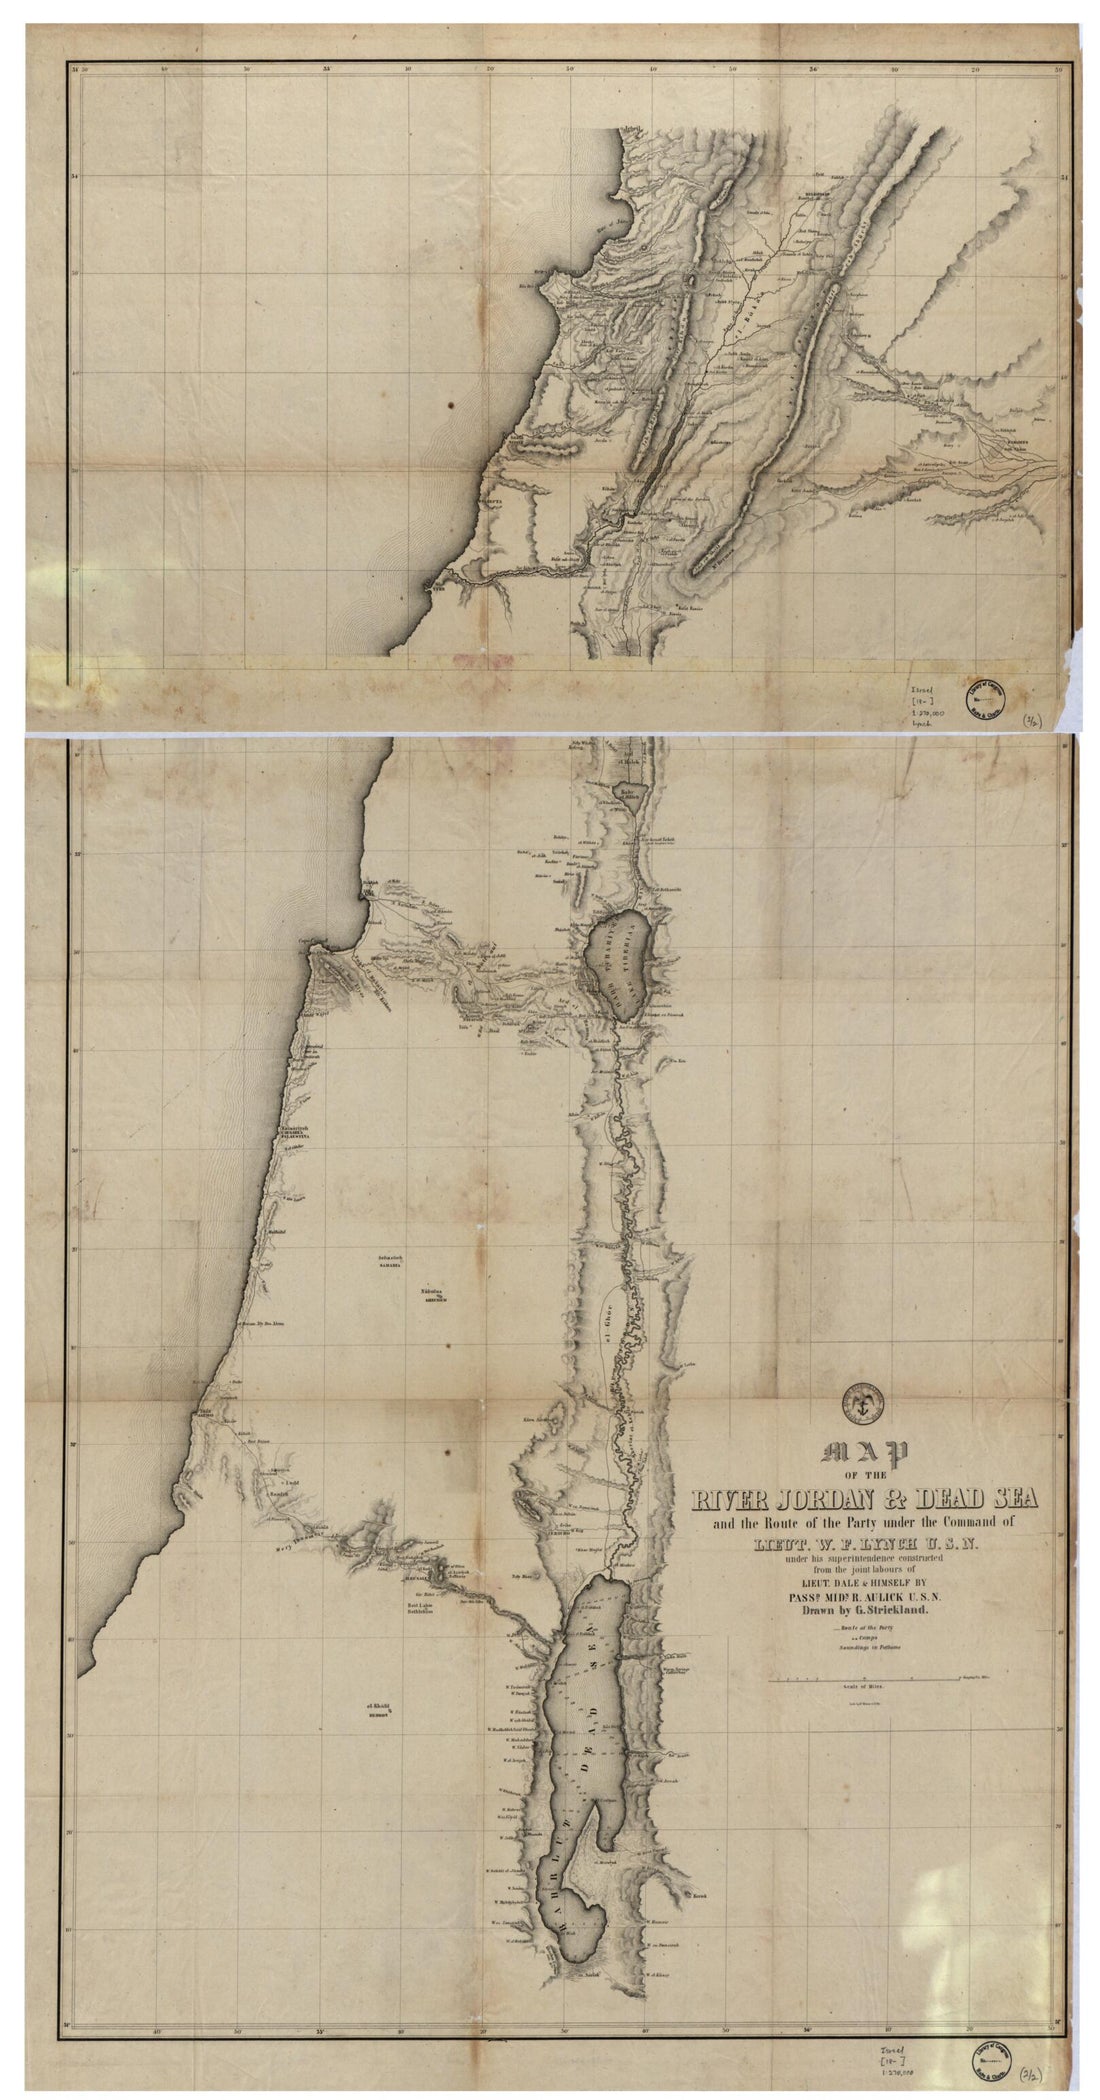 This old map of Map of the River Jordan &amp; Dead Sea : and the Route of the Party Under the Command of Lieut. W.F. Lynch, U.S.N. Under His Superintendence Constructed from the Joint Labours of Lieut. Dale &amp; Himself by Passd. Midn. R. Aulick U.S.N from 1840